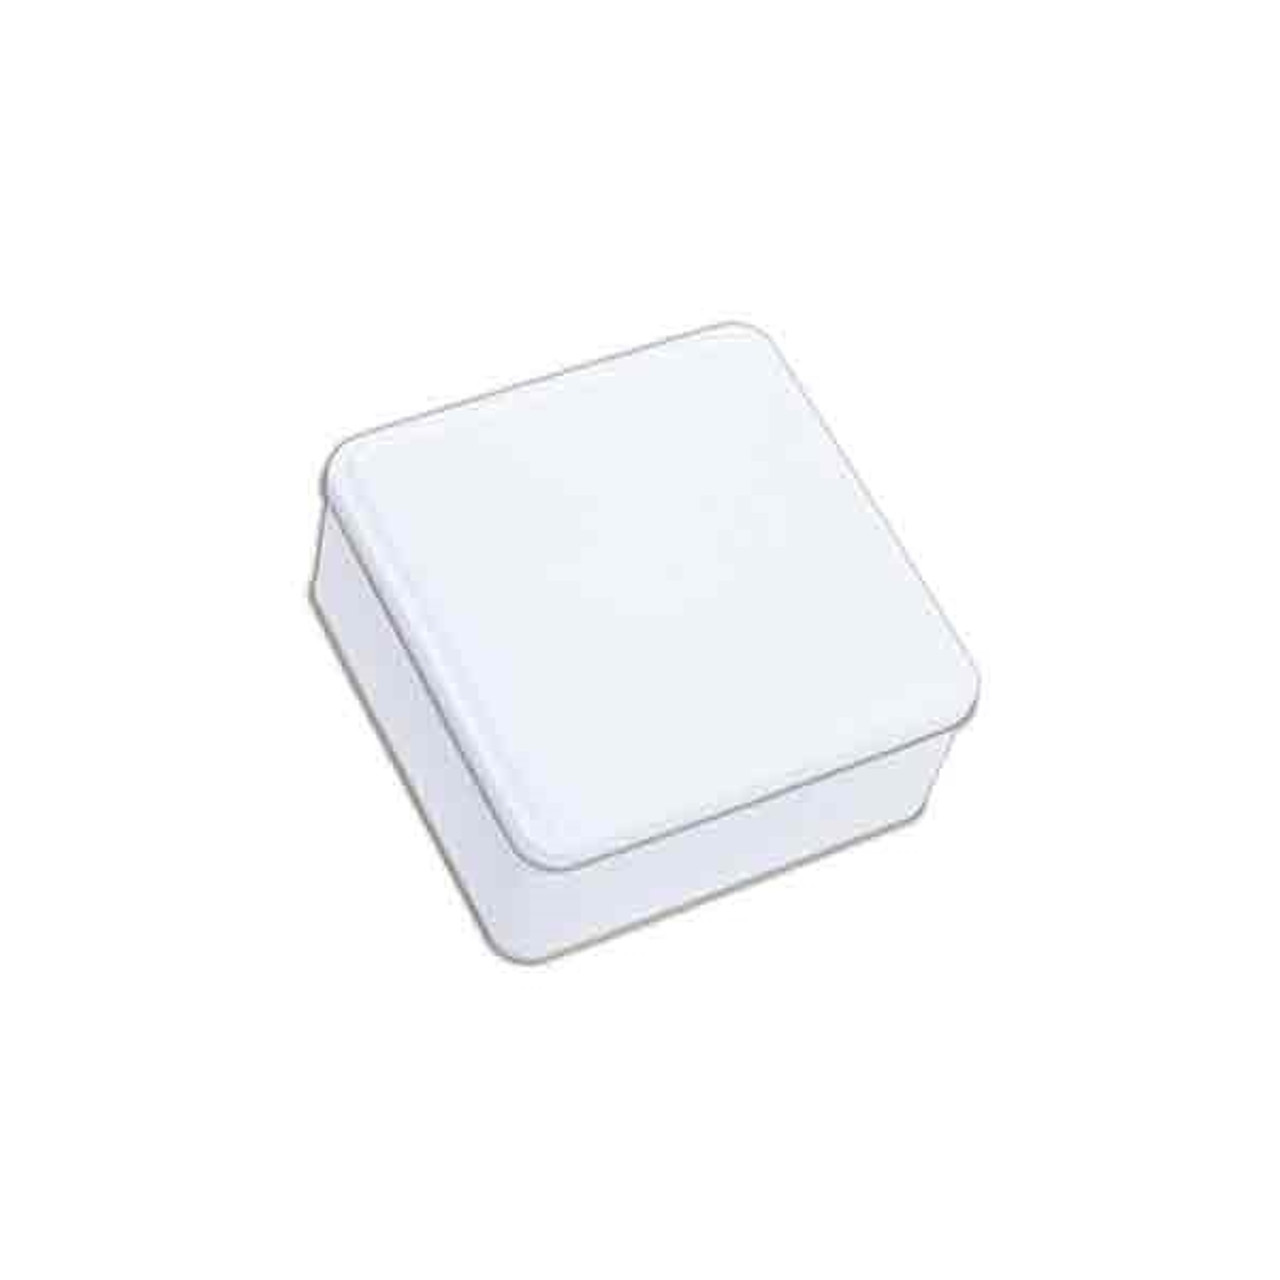 Square Cookie Tins - 6-1/8 x 6-1/8 x 2-5/8 - White - 24 Tins/Pack